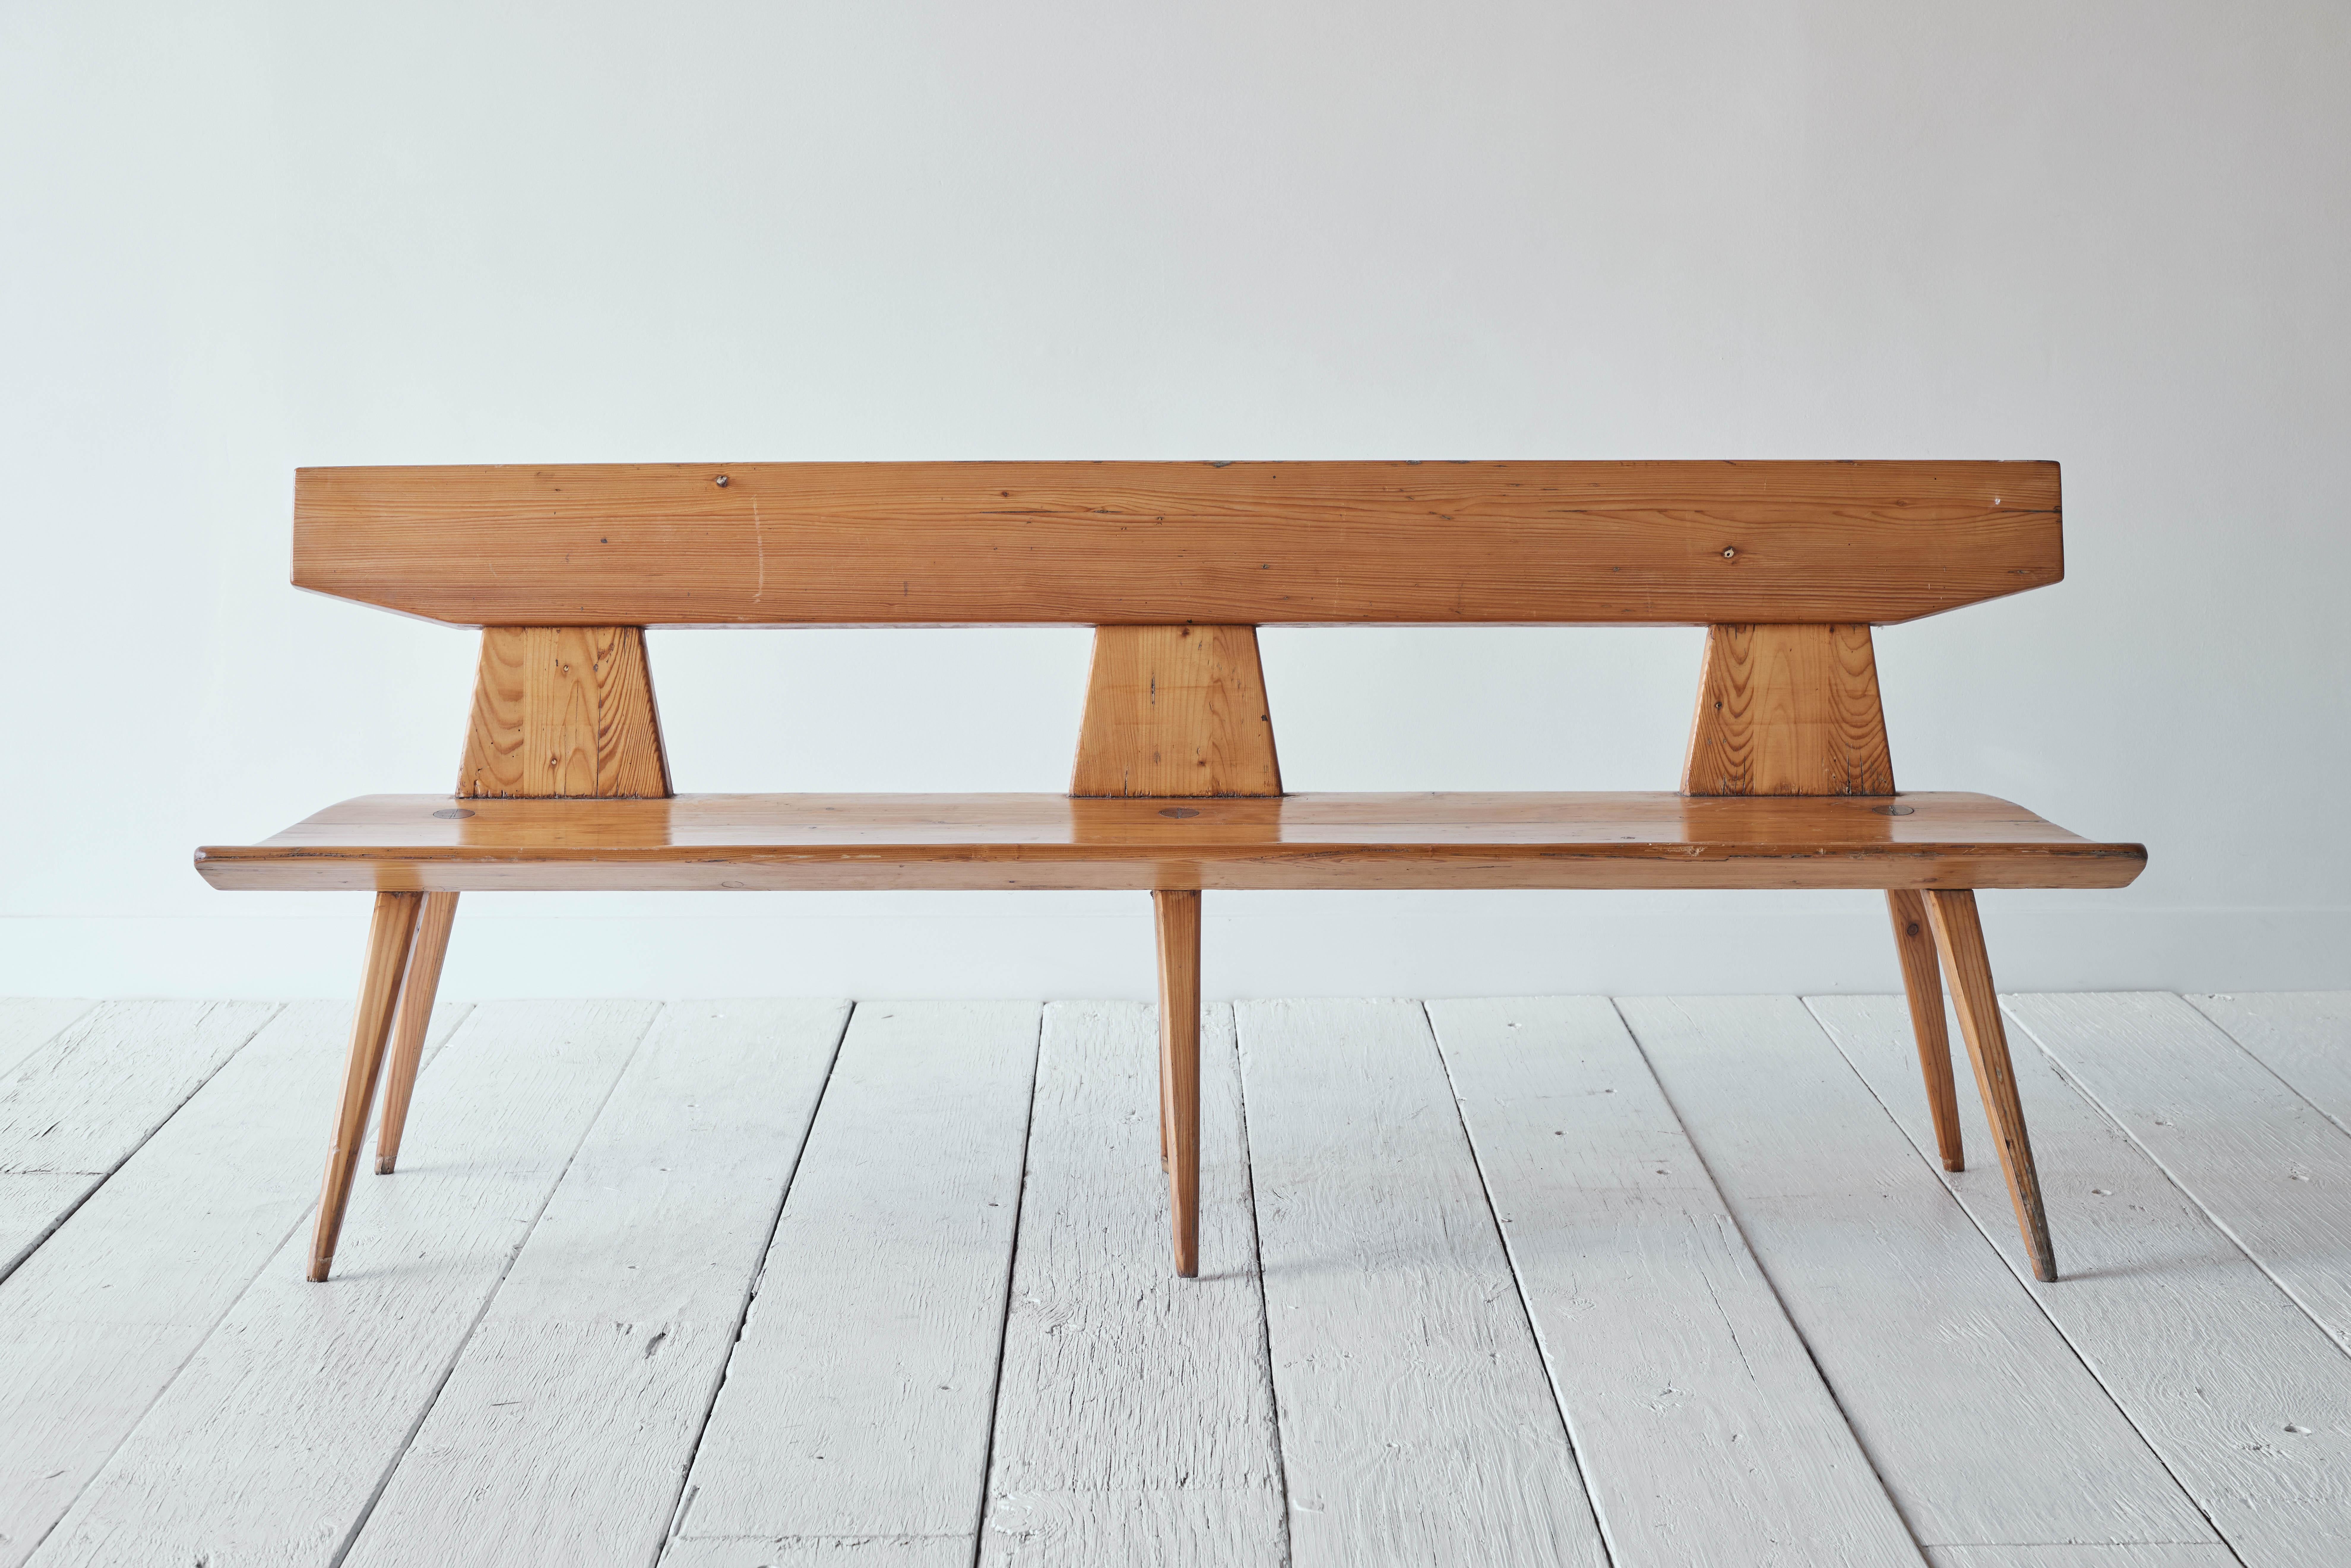 A handsome handcrafted pine wooden bench by Jacob Kielland Brandt for I. Christiansen in Denmark. This bench was made in the 1960's and is considered a recognizable Scandinavian Modern period piece based on its specific shape, elegant curves and